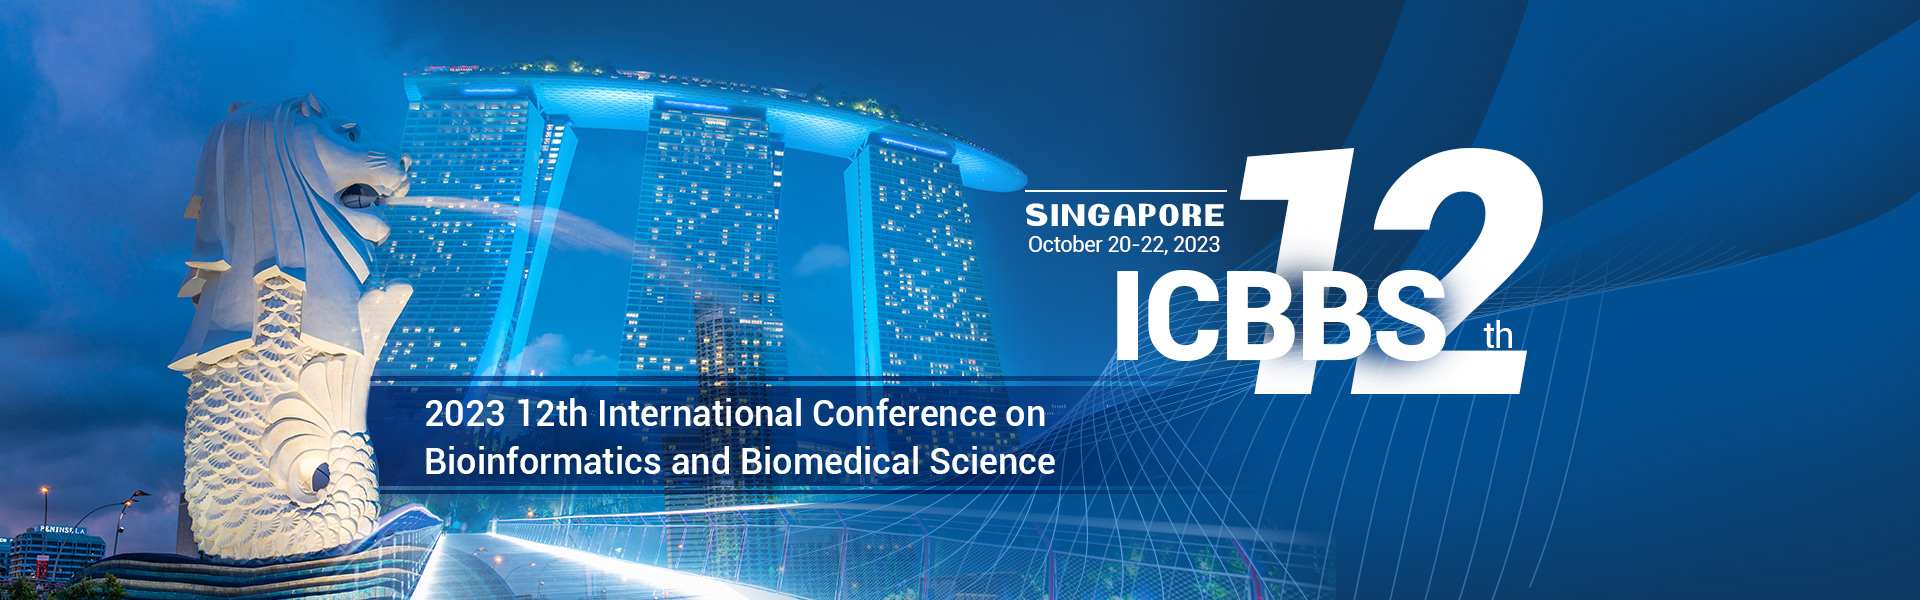 12th International Conference on Bioinformatics and Biomedical Science